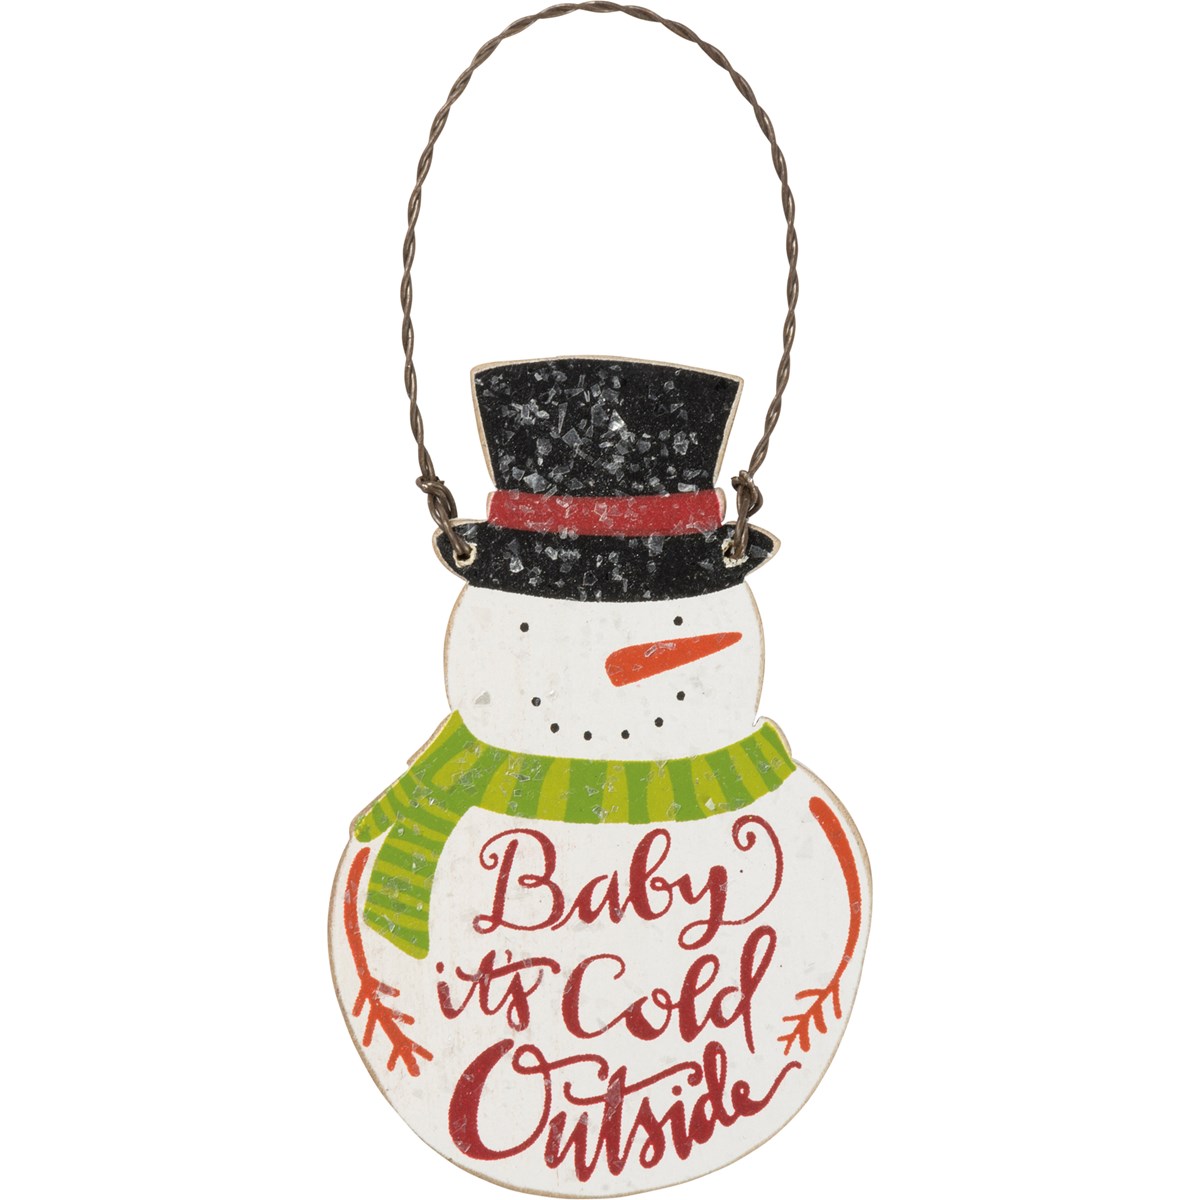 Baby It's Cold Outside Ornament - Wood, Wire, Mica